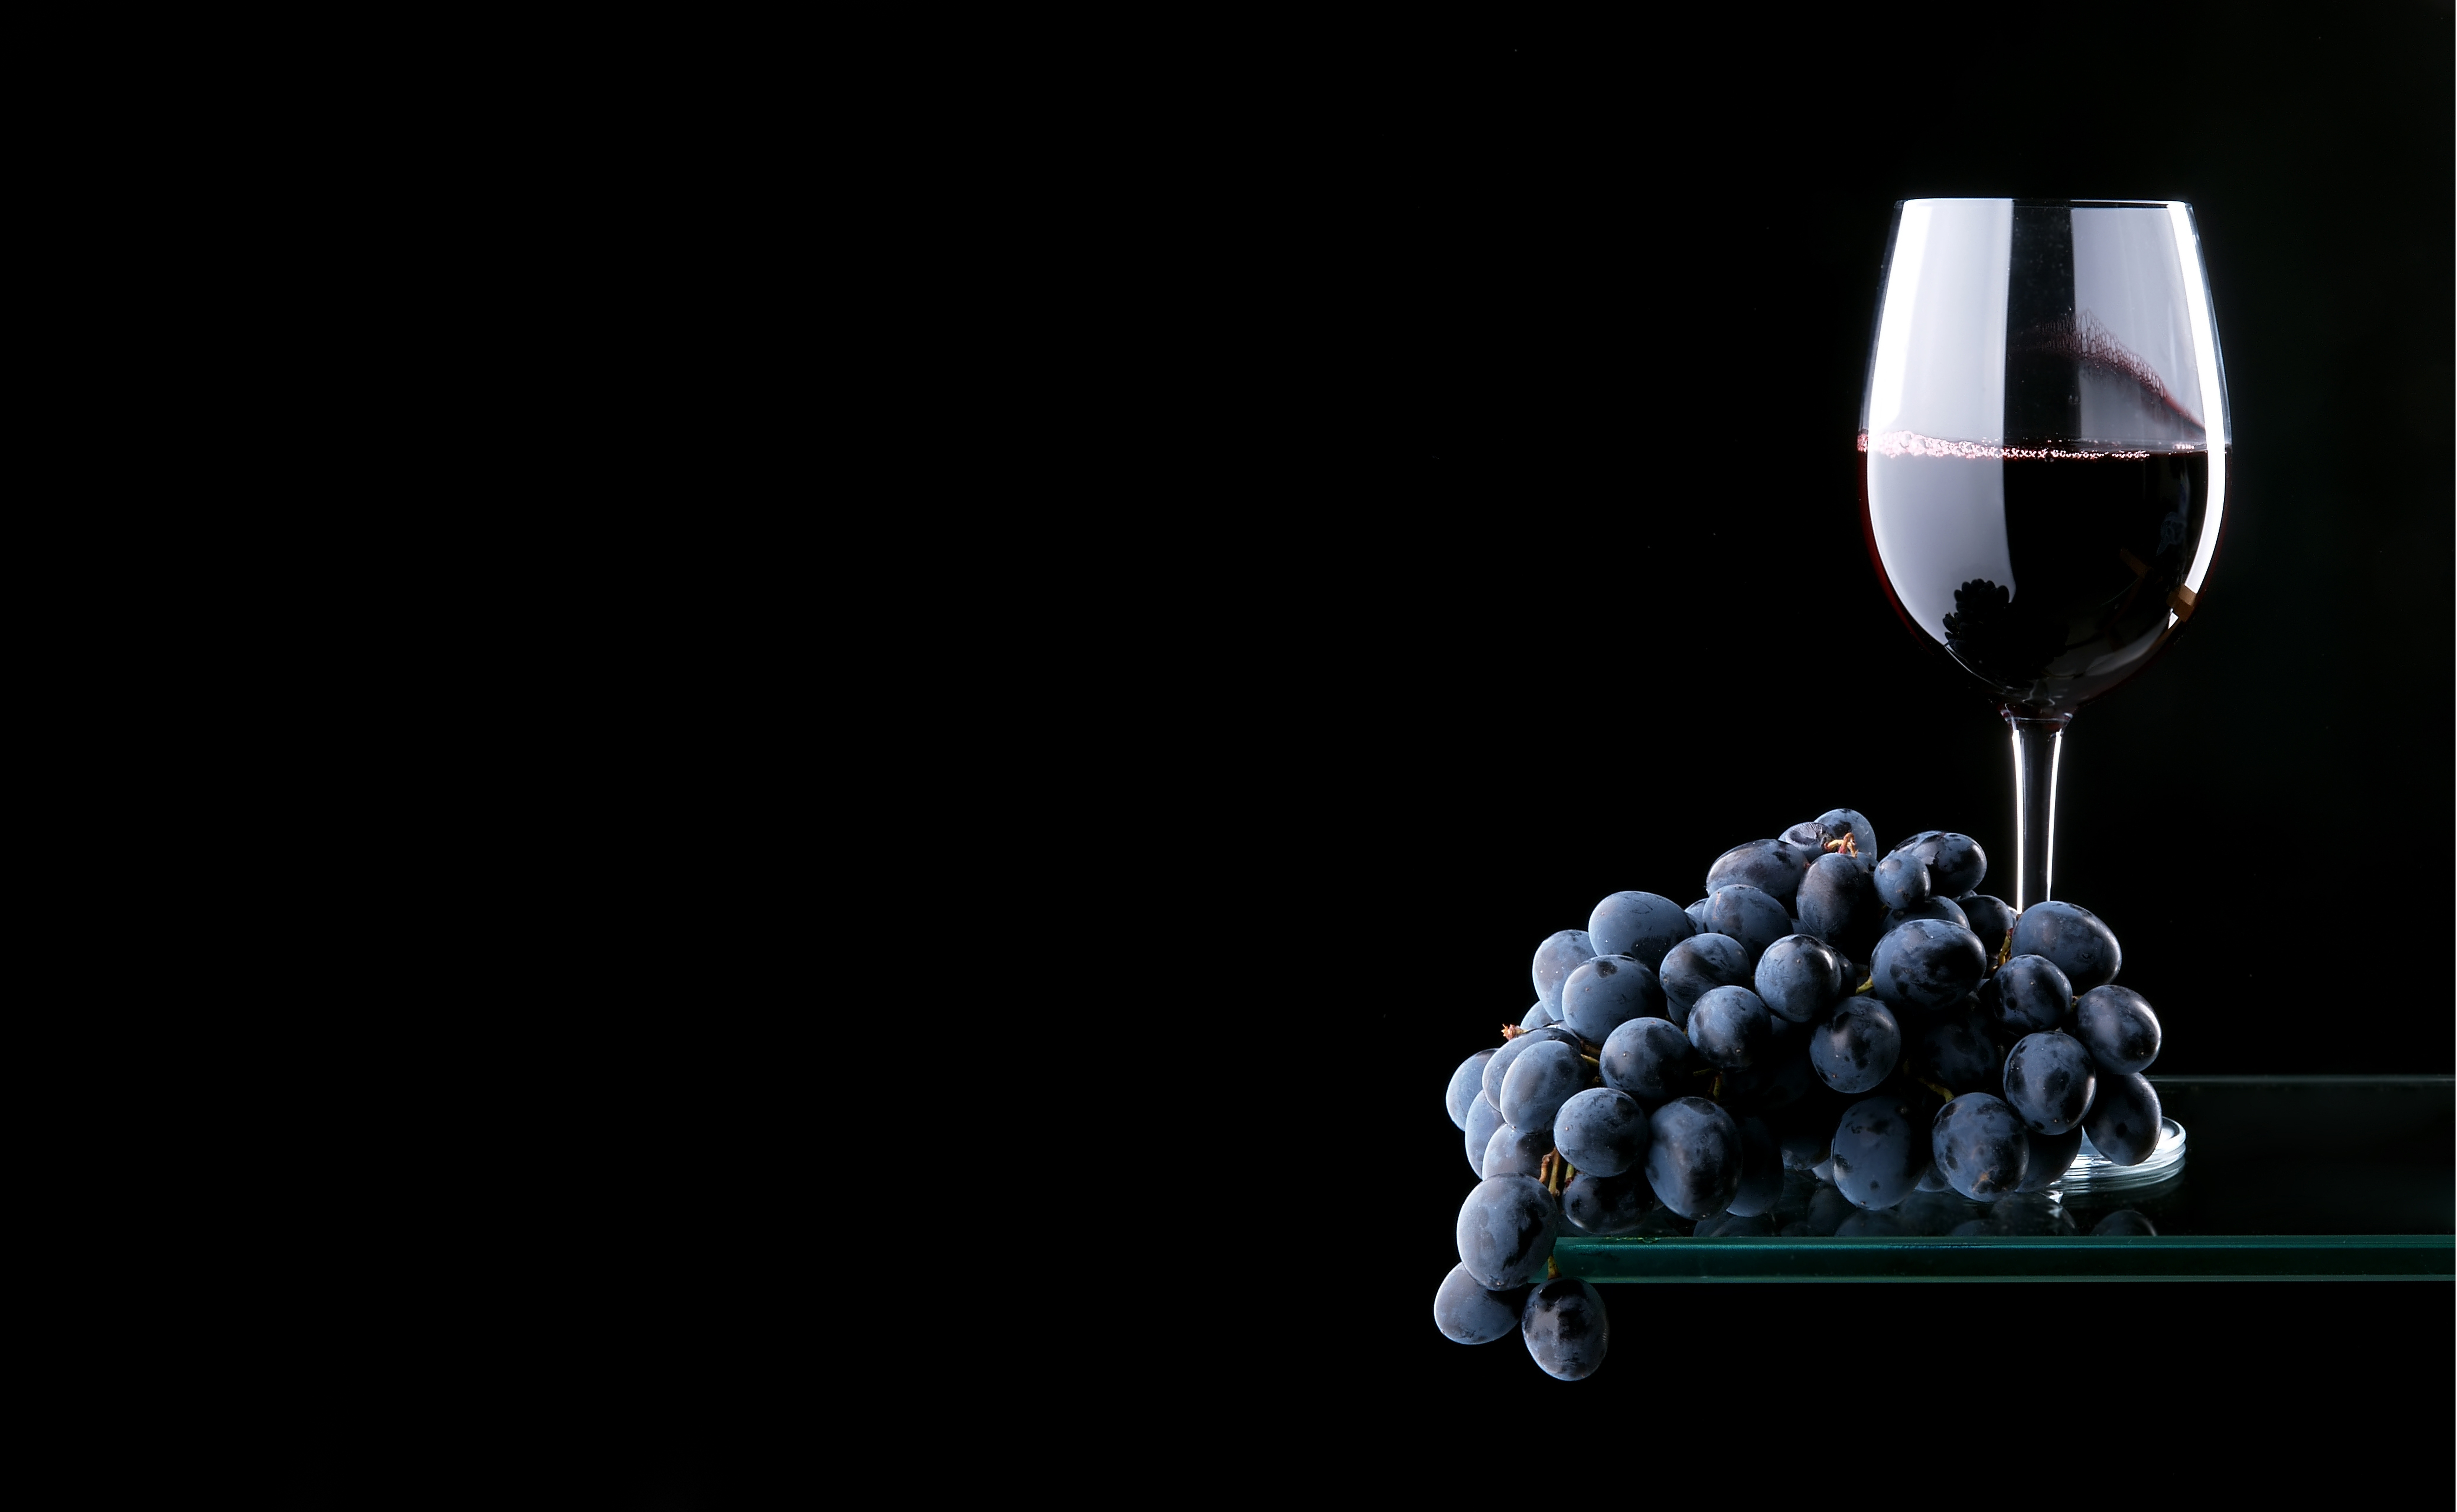 Black Background Grapes Wine Wallpaper And Image